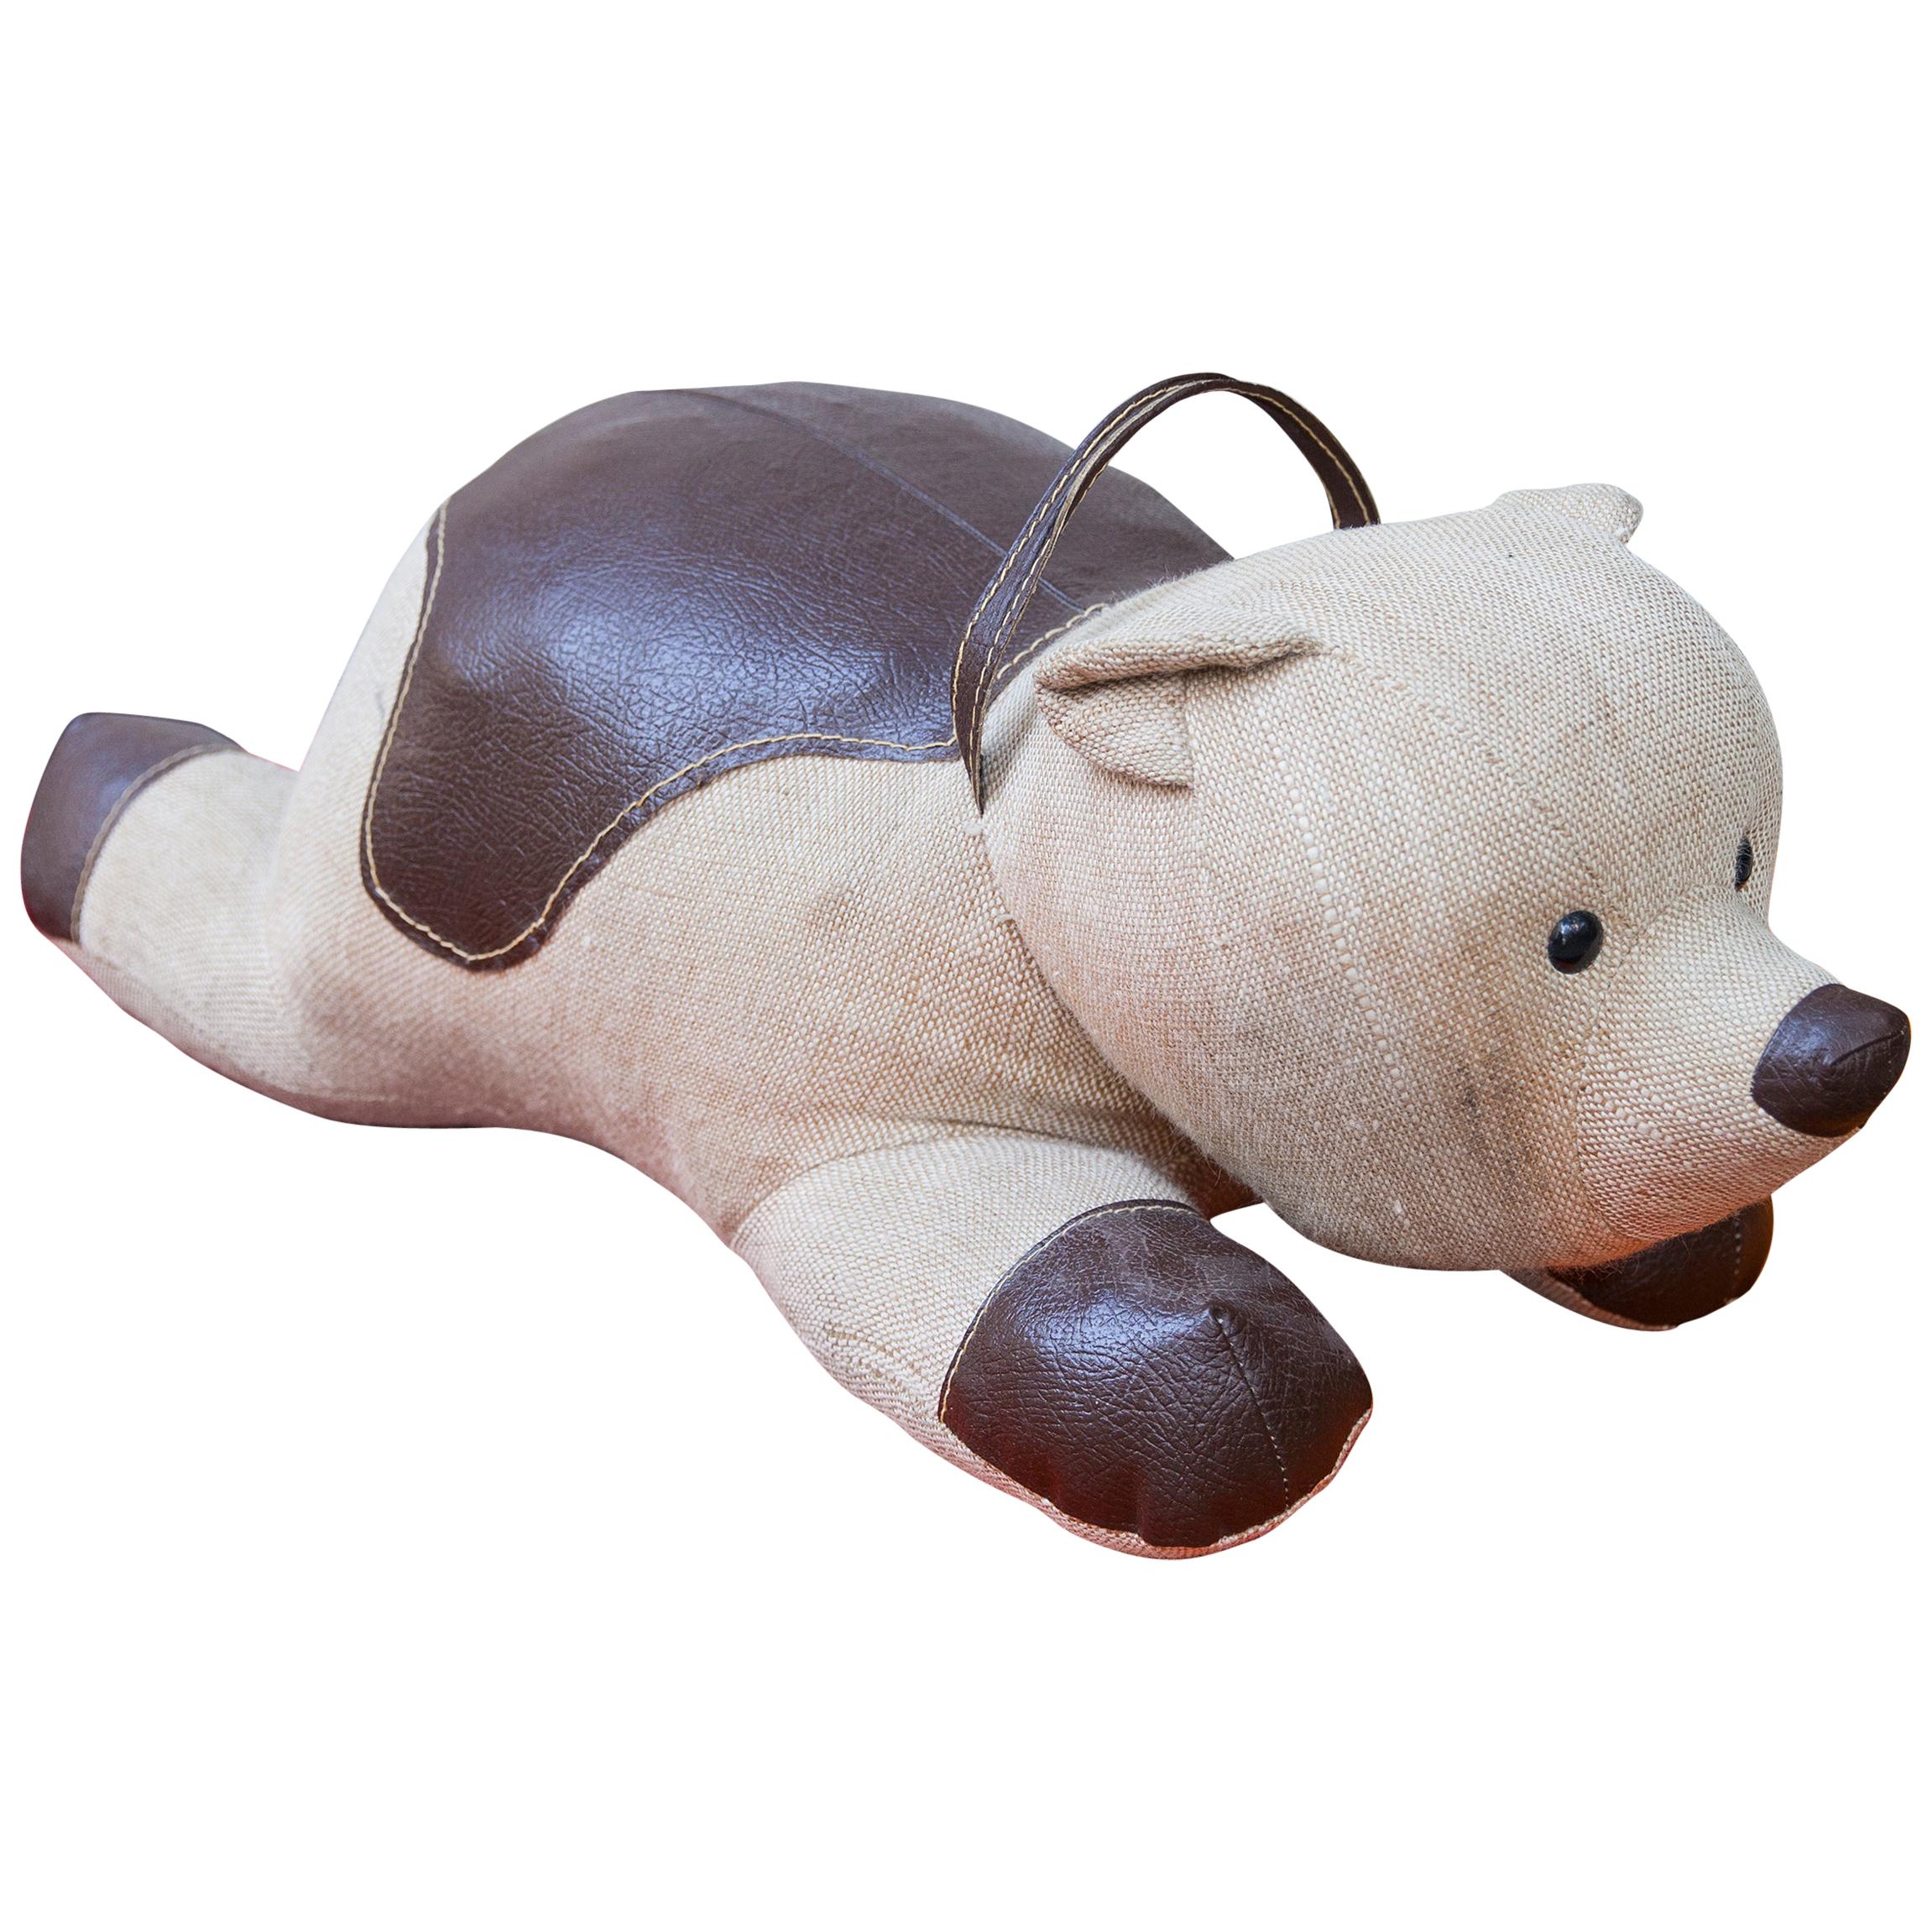 Renate Müller Bear Therapeutic Toy, 1968